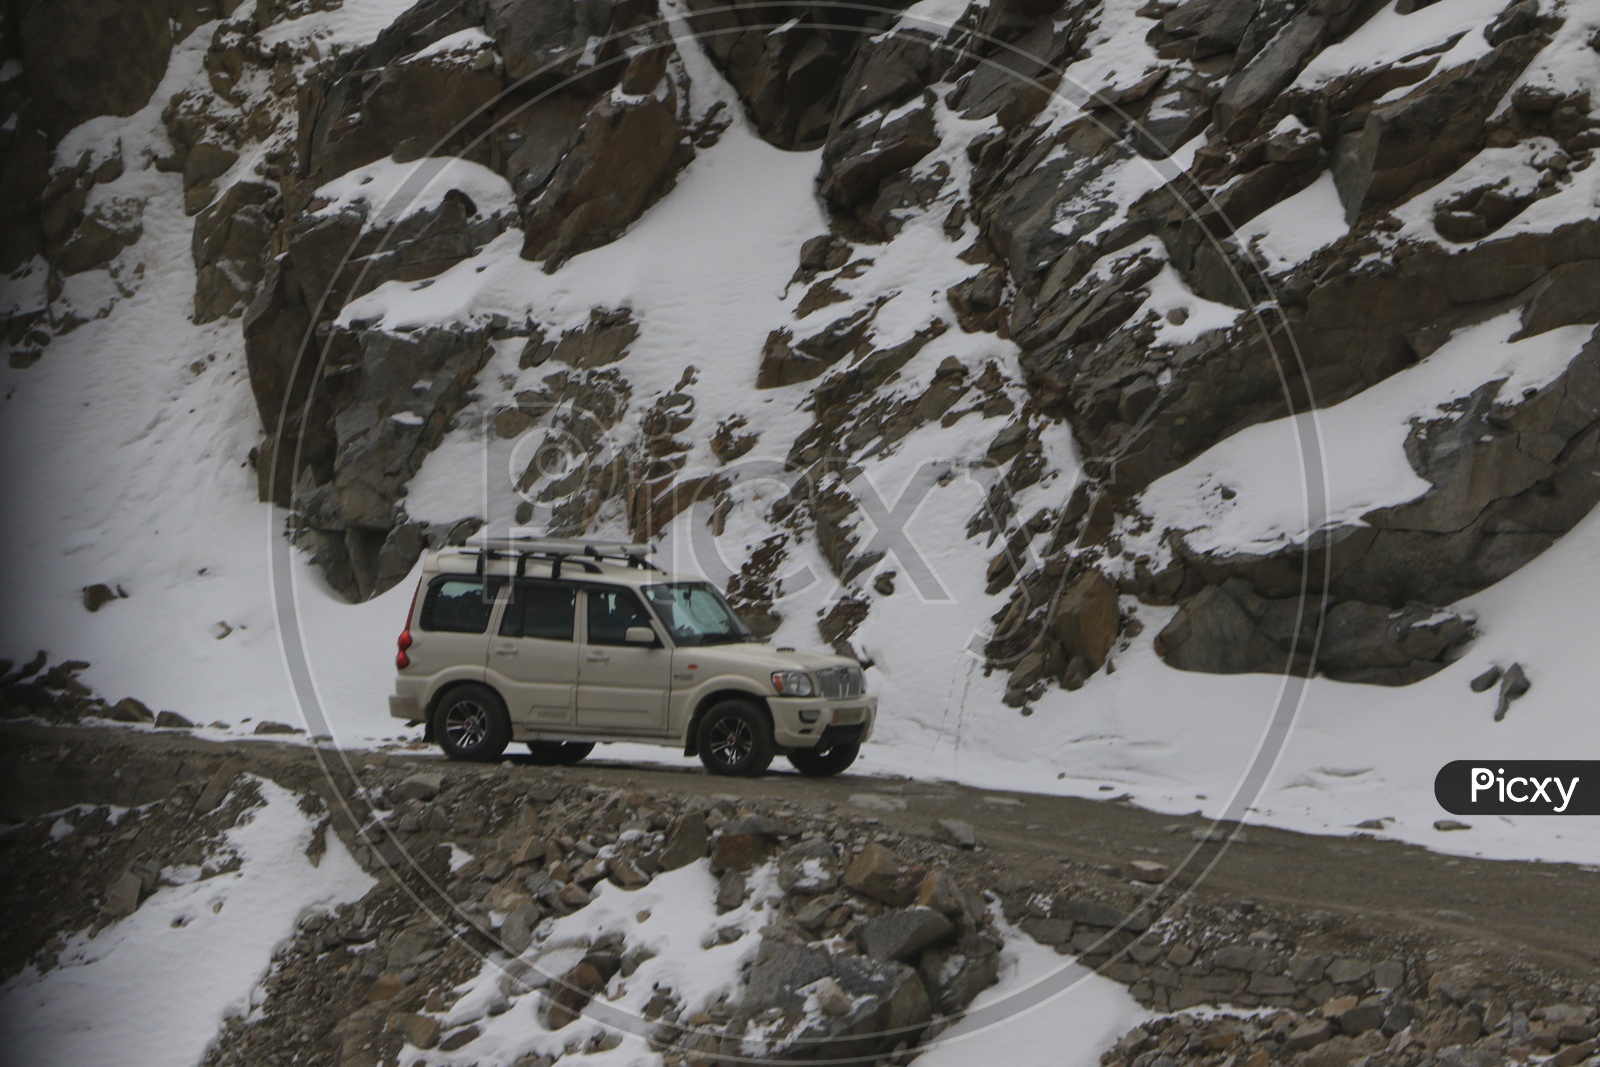 Roadways of leh with beautiful  snow capped mountains in the background